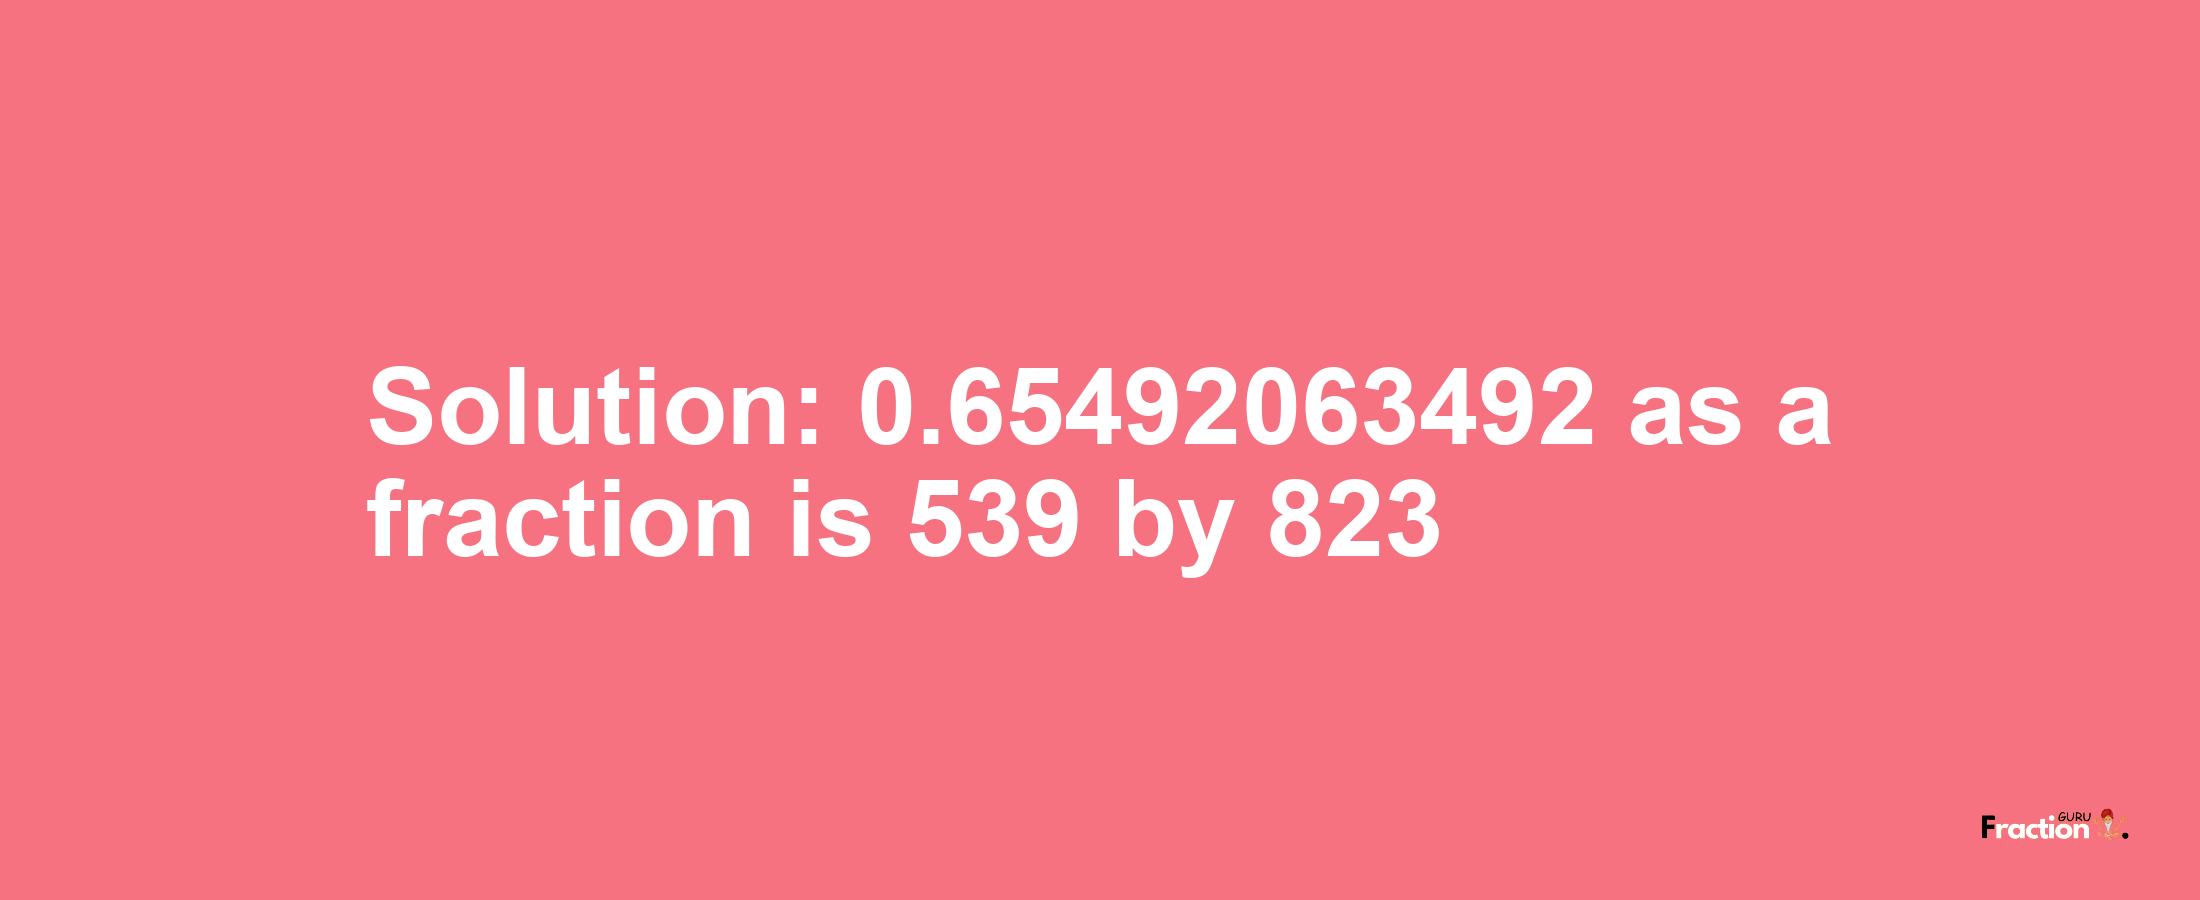 Solution:0.65492063492 as a fraction is 539/823